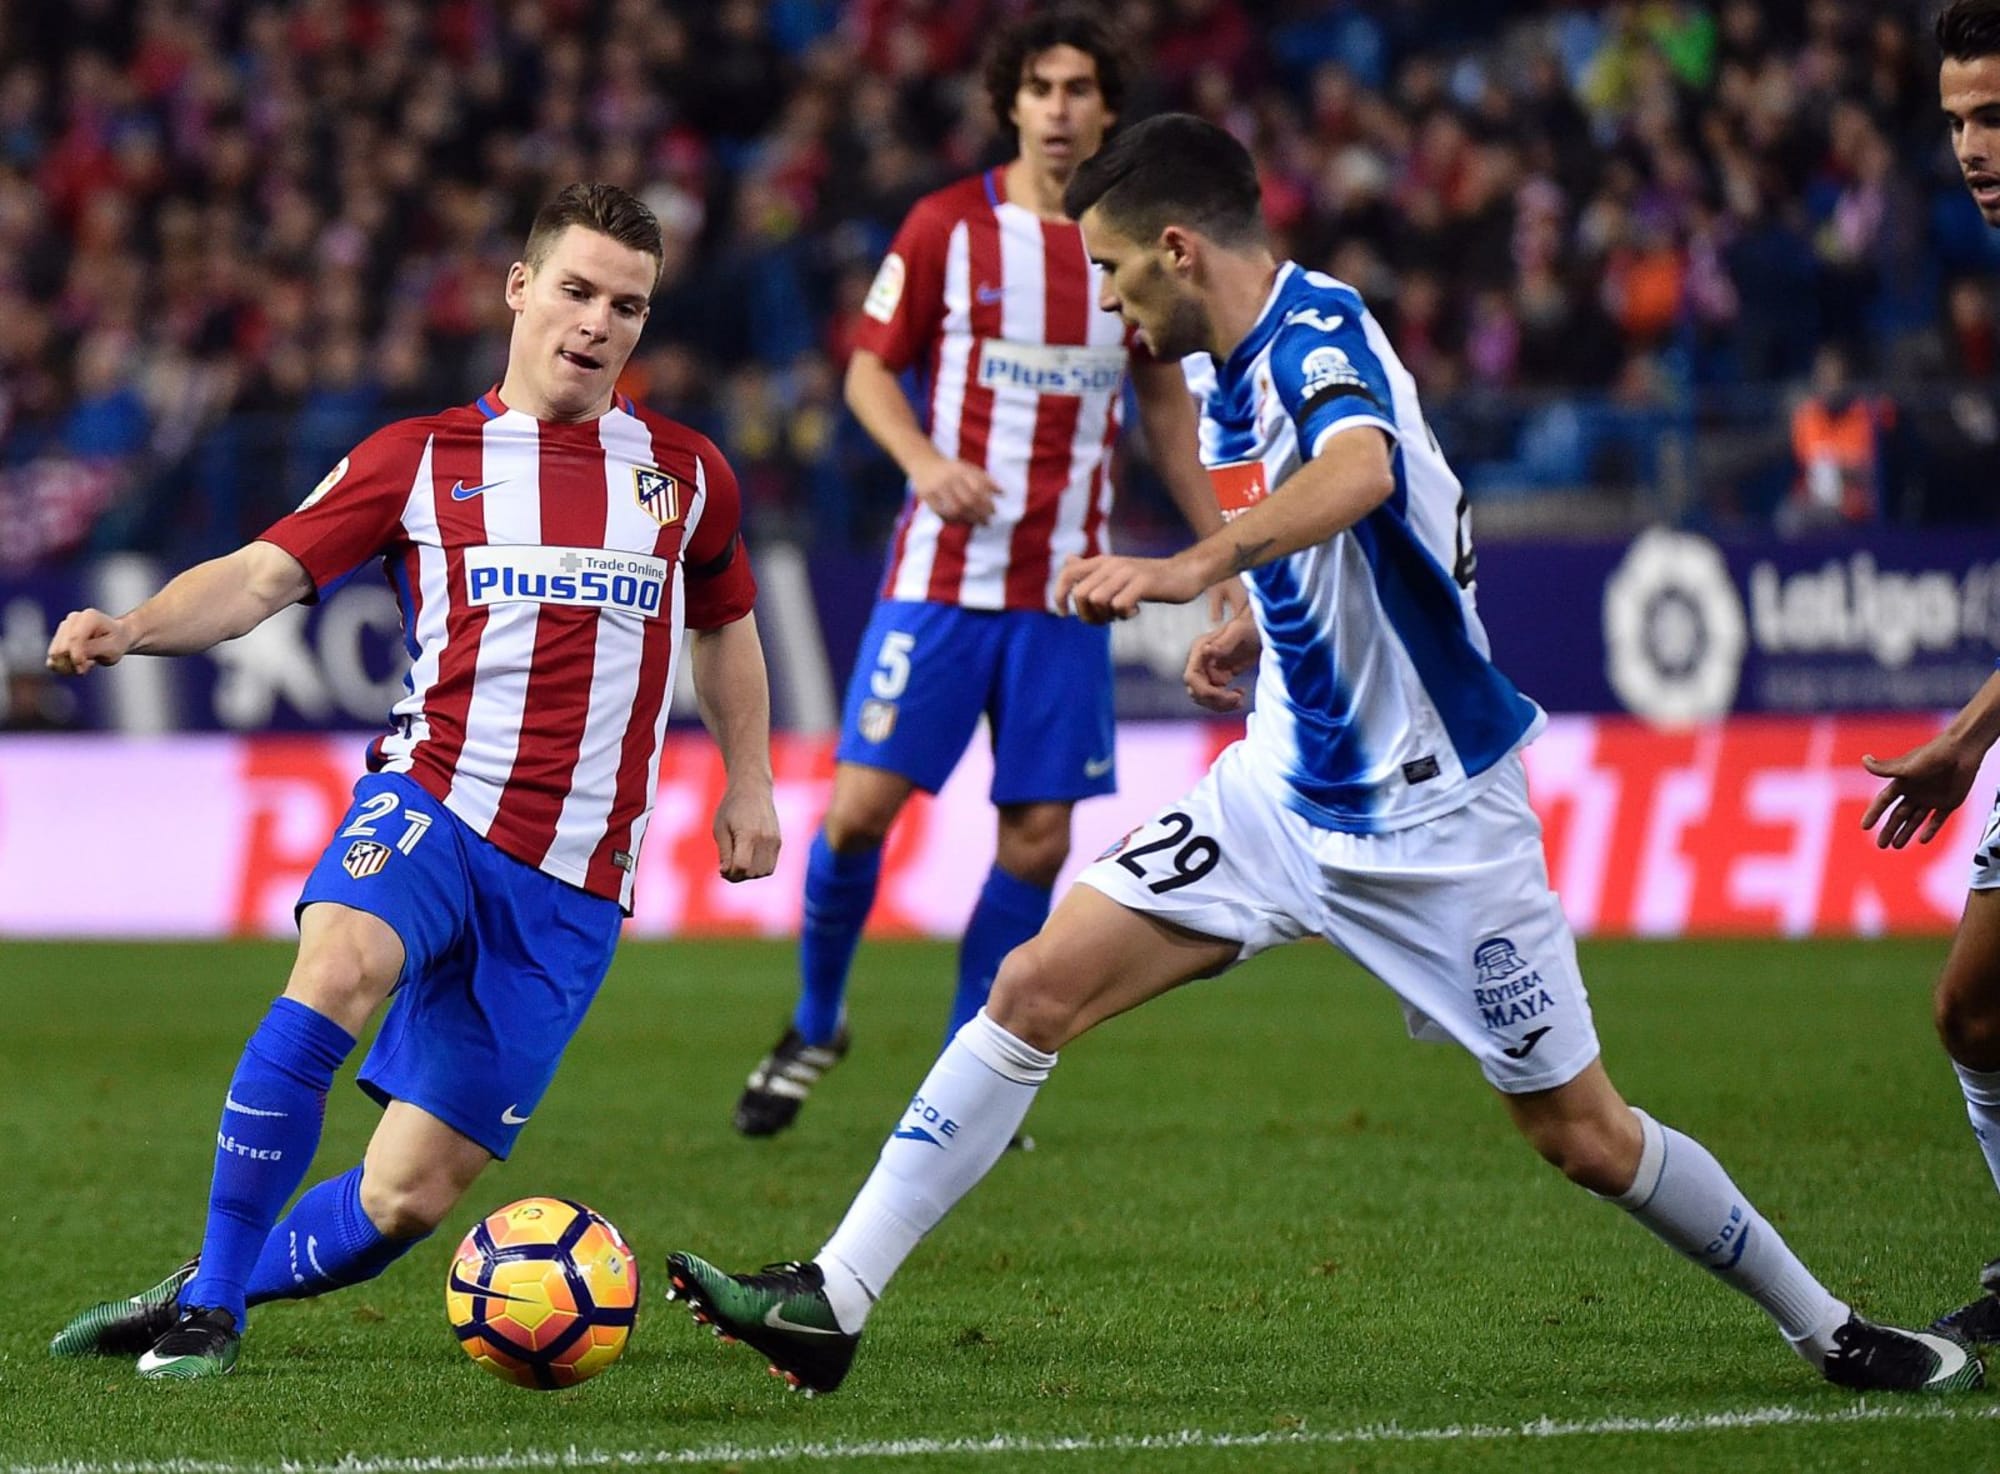 Atletico travel to Valencia in highlight of La opening weekend